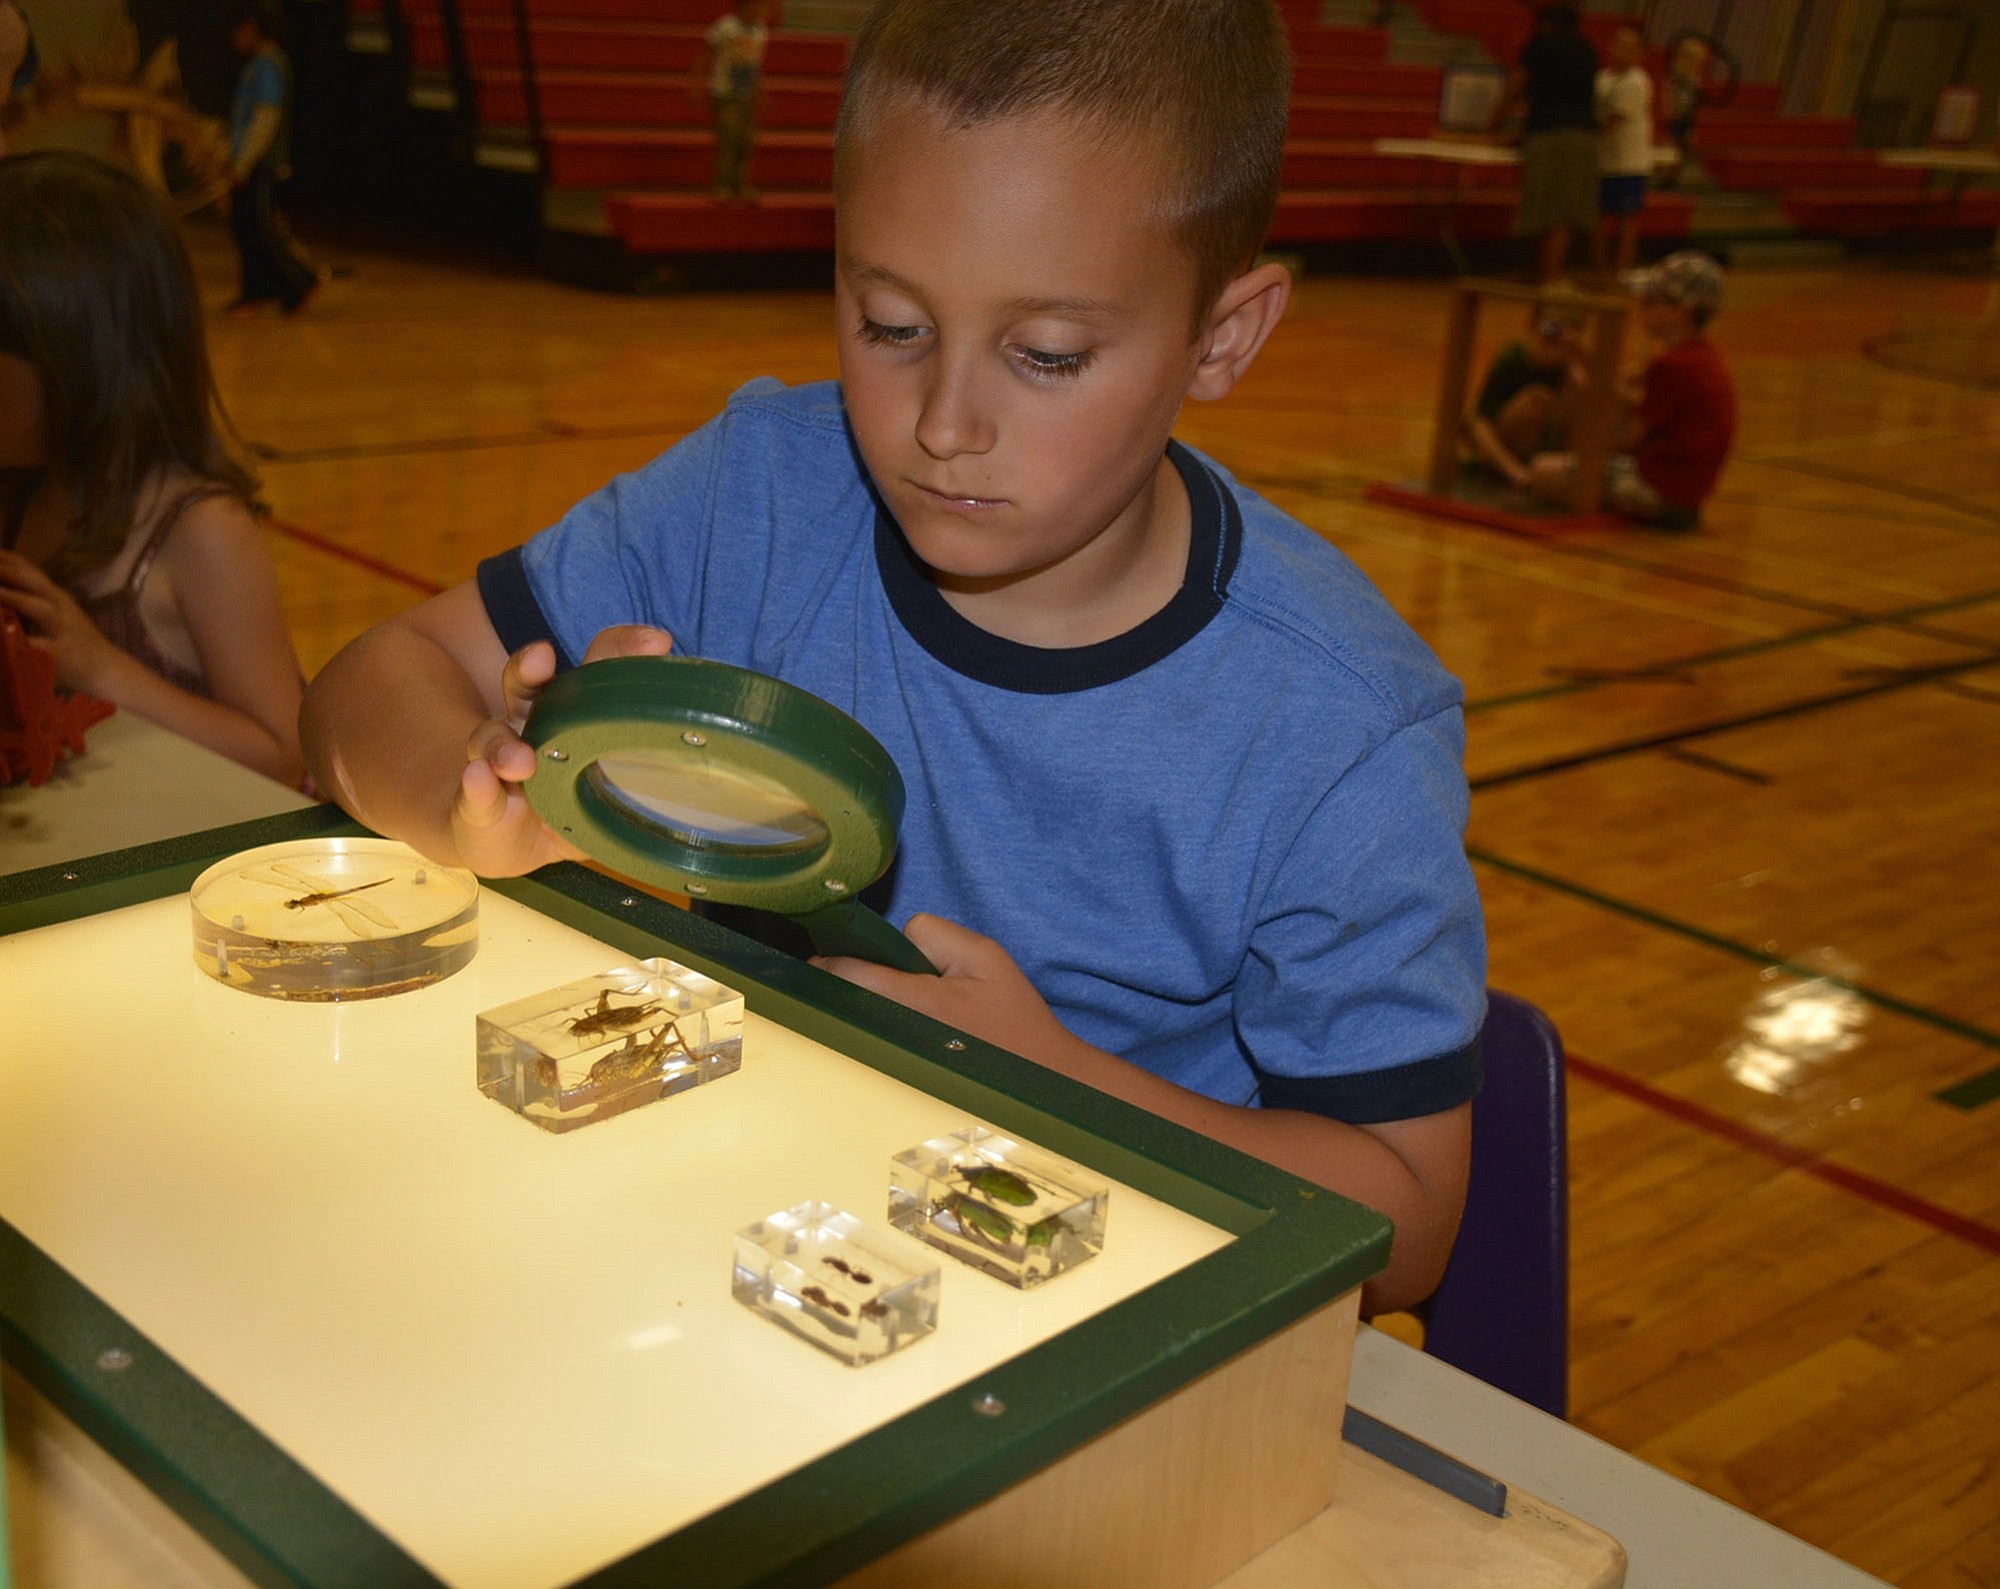 Washougal: Hathaway Elementary School student Dean Cox examines some insects during a summer program at the school hosted by the Oregon Museum of Science and Industry.